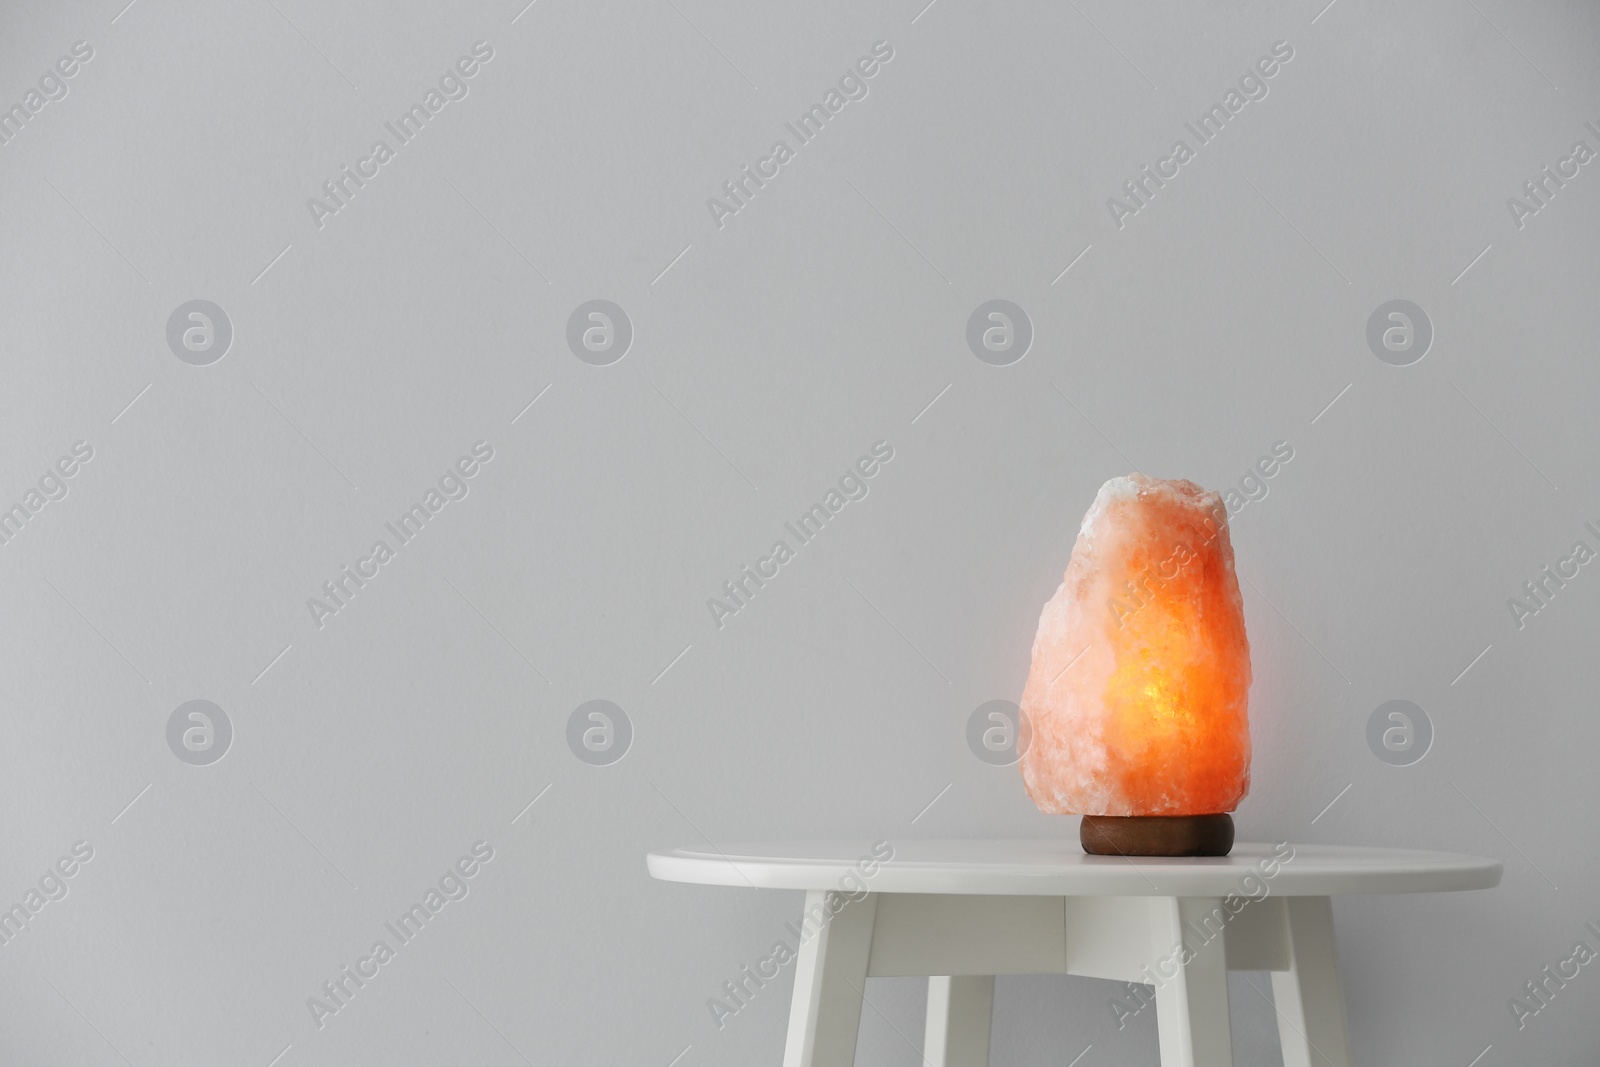 Photo of Himalayan salt lamp on table against white background. Space for text